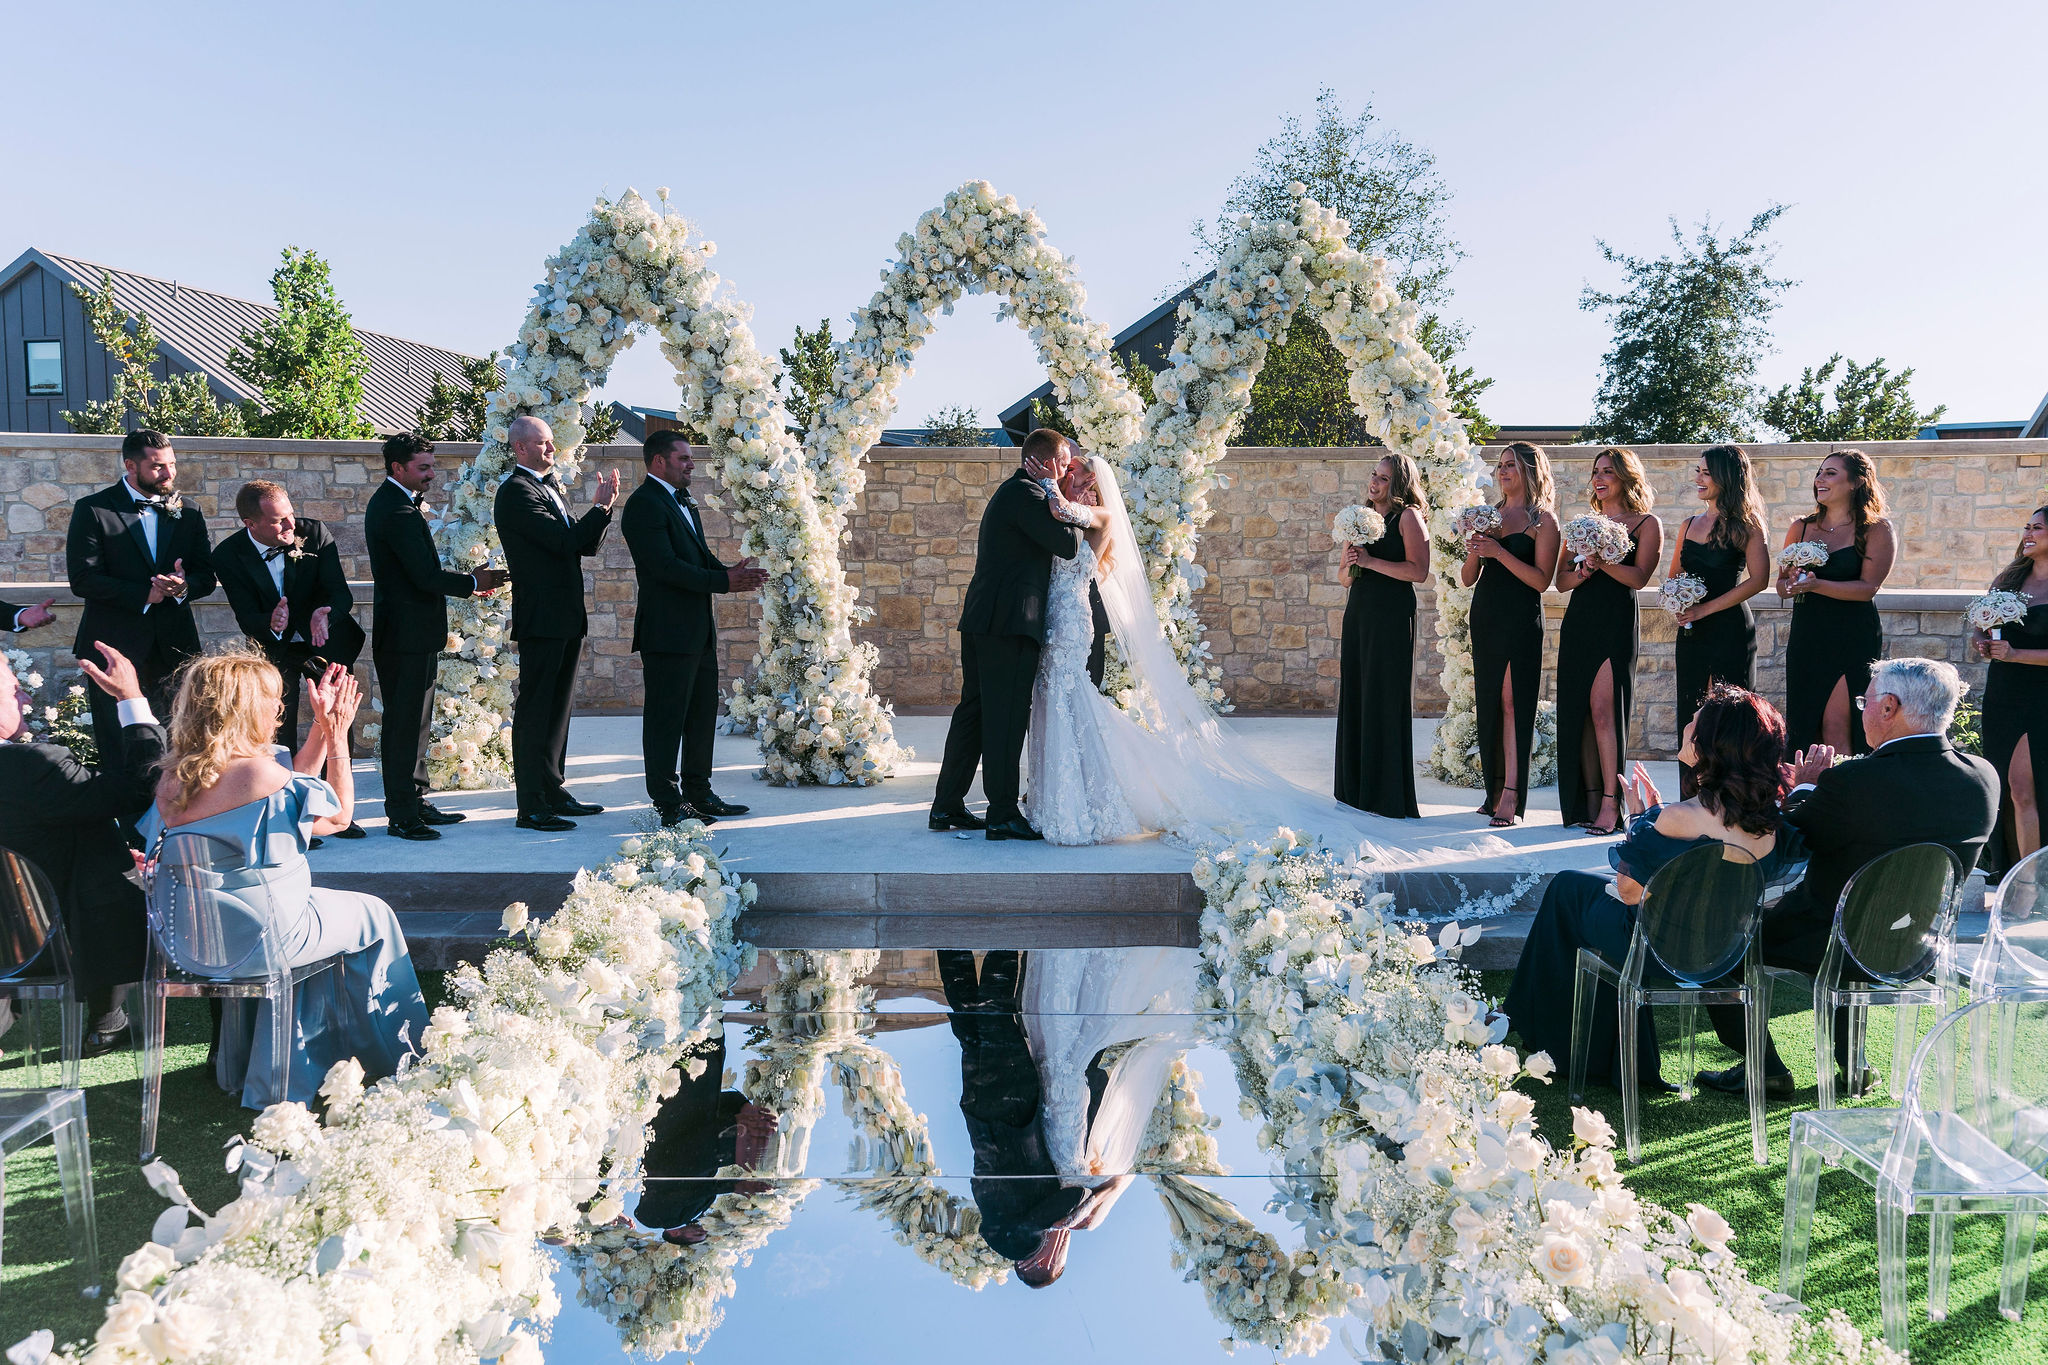 Stanly Ranch Wedding in Napa, California